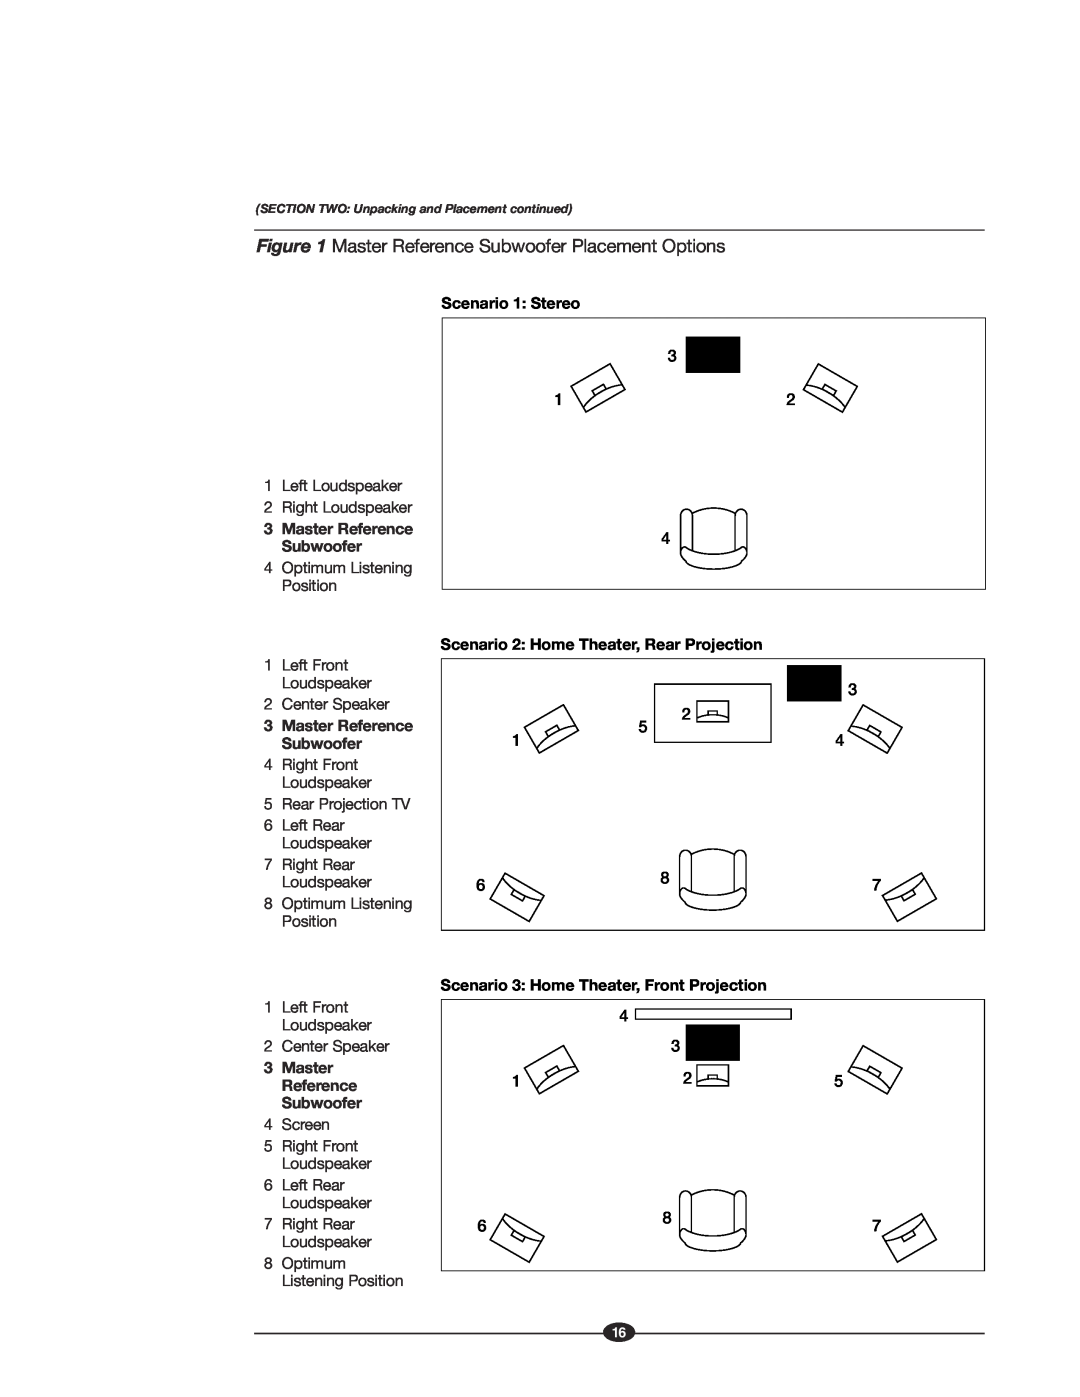 Krell Industries MASTER REFERENCE SUBWOOFER manual 3Master Reference Subwoofer, Scenario 1 Stereo 